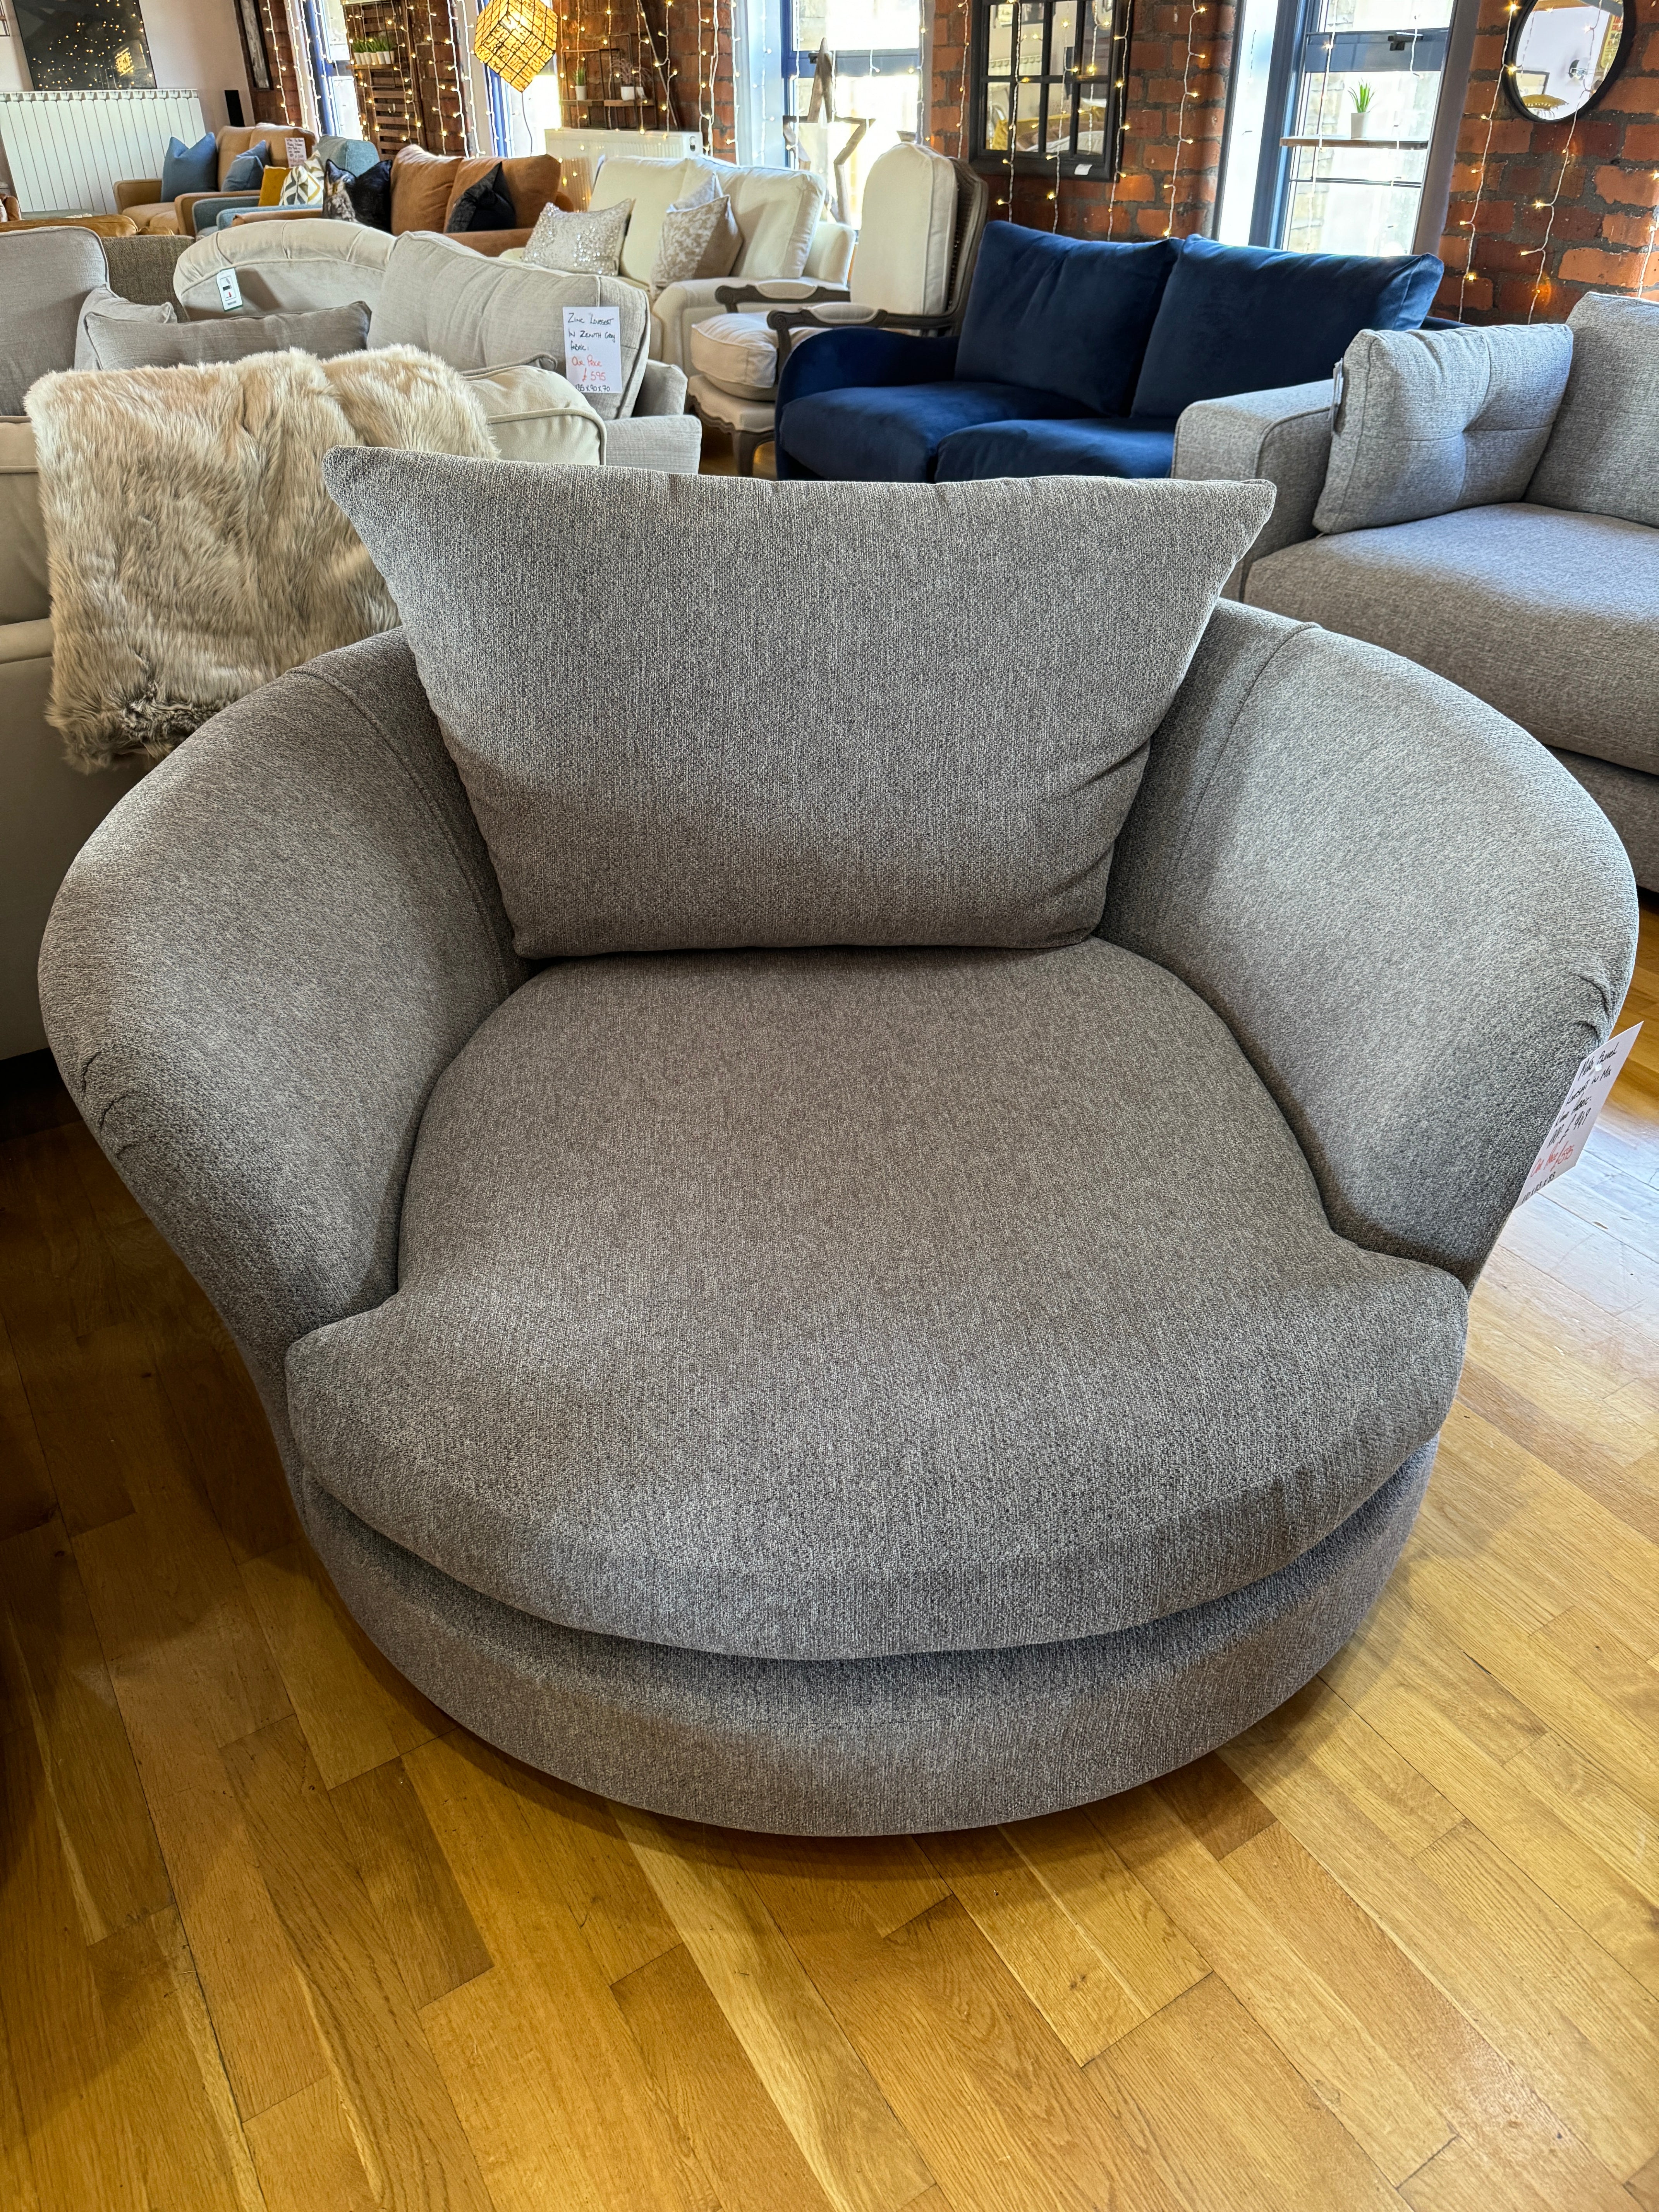 SOFOLOGY MAJESTIC round swivel loveseat chair in charcoal weave fabric